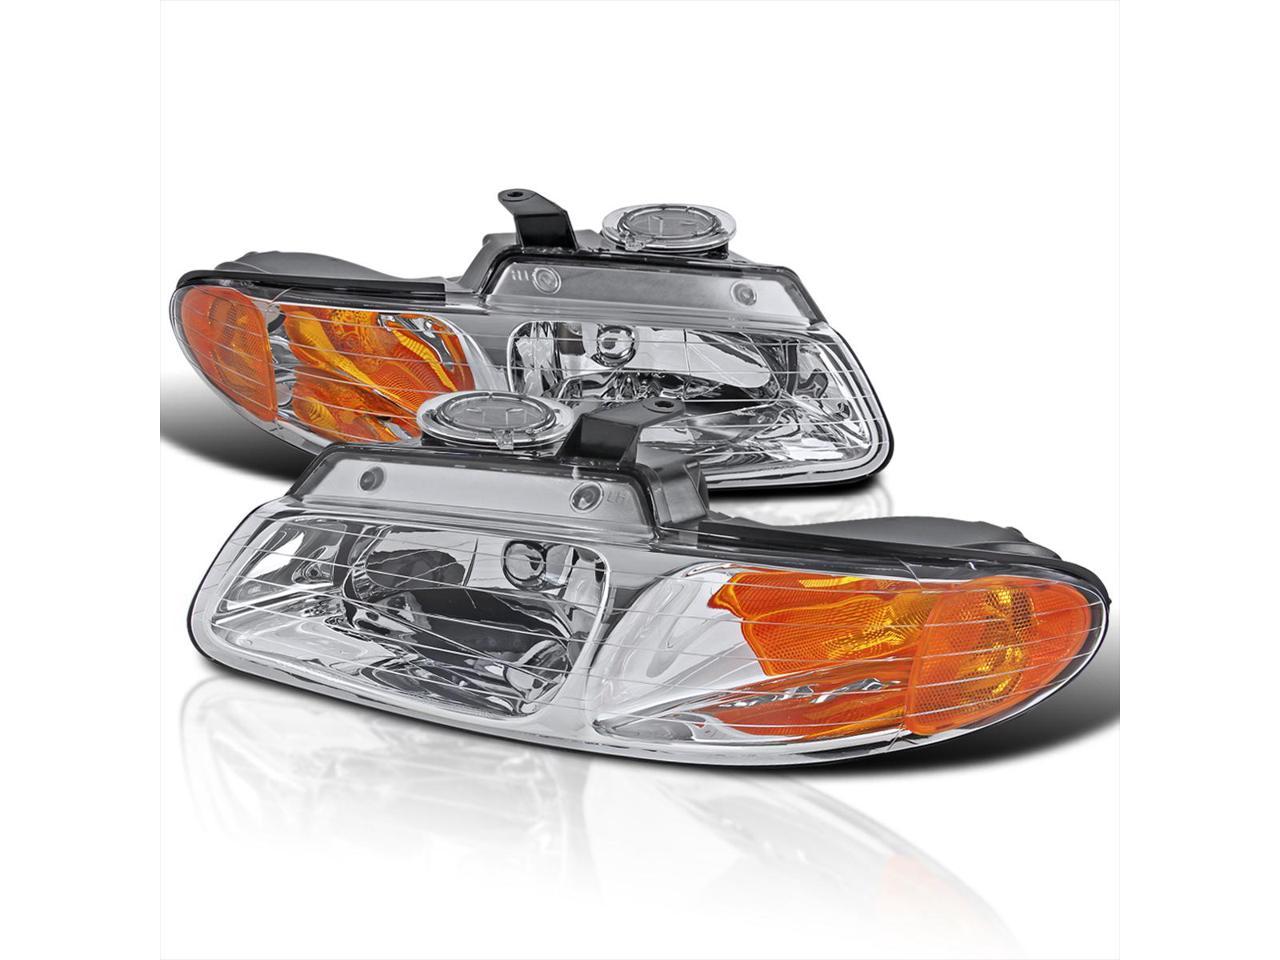 For 1996-2000 Caravan Town & Country Voyager Clear Headlights+8-LED Fog Lamps